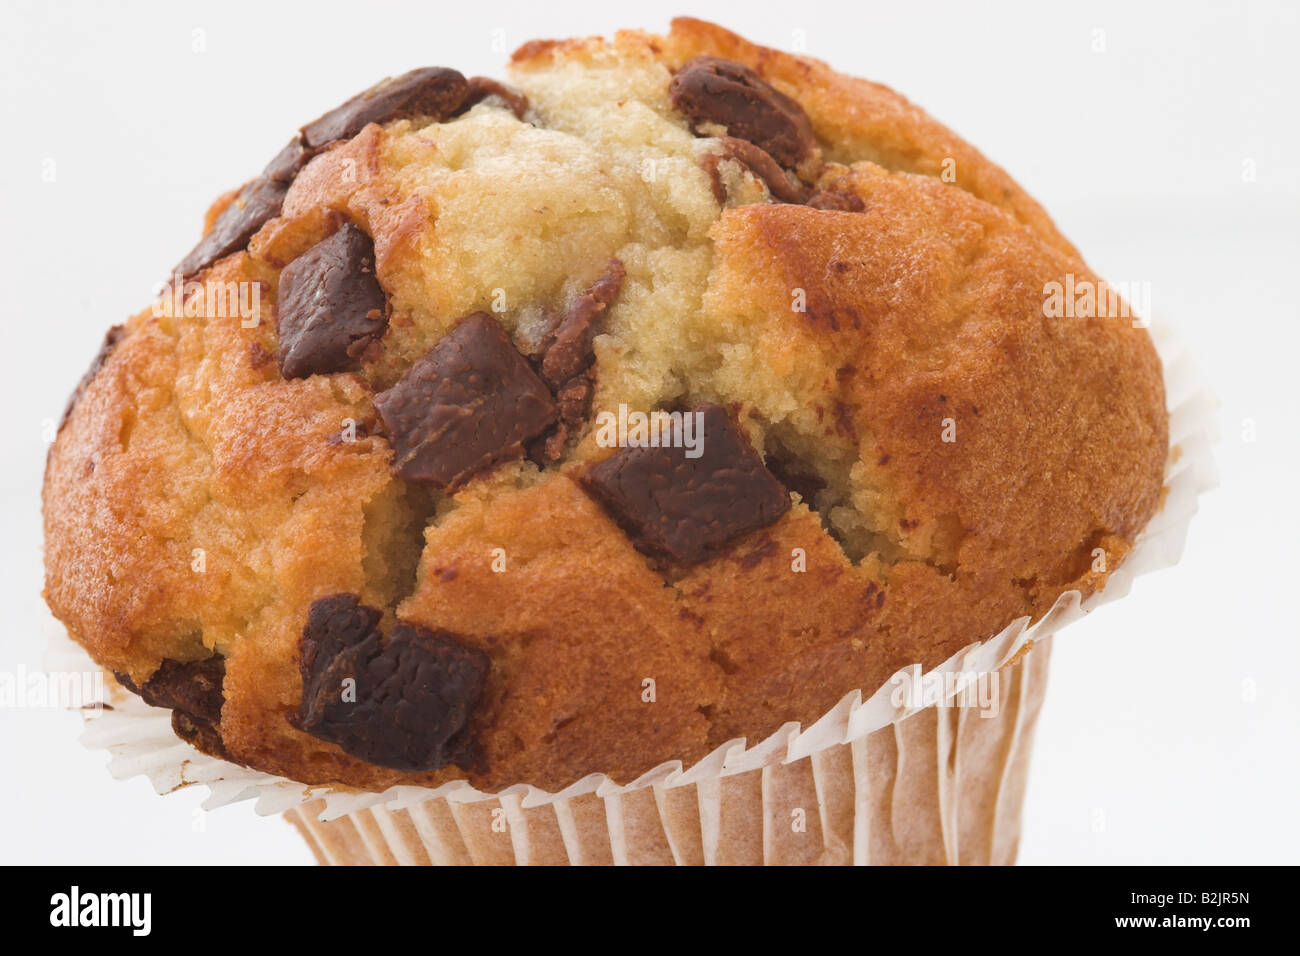 Close up of a Chocolate Chip Muffin against a white background Stock Photo